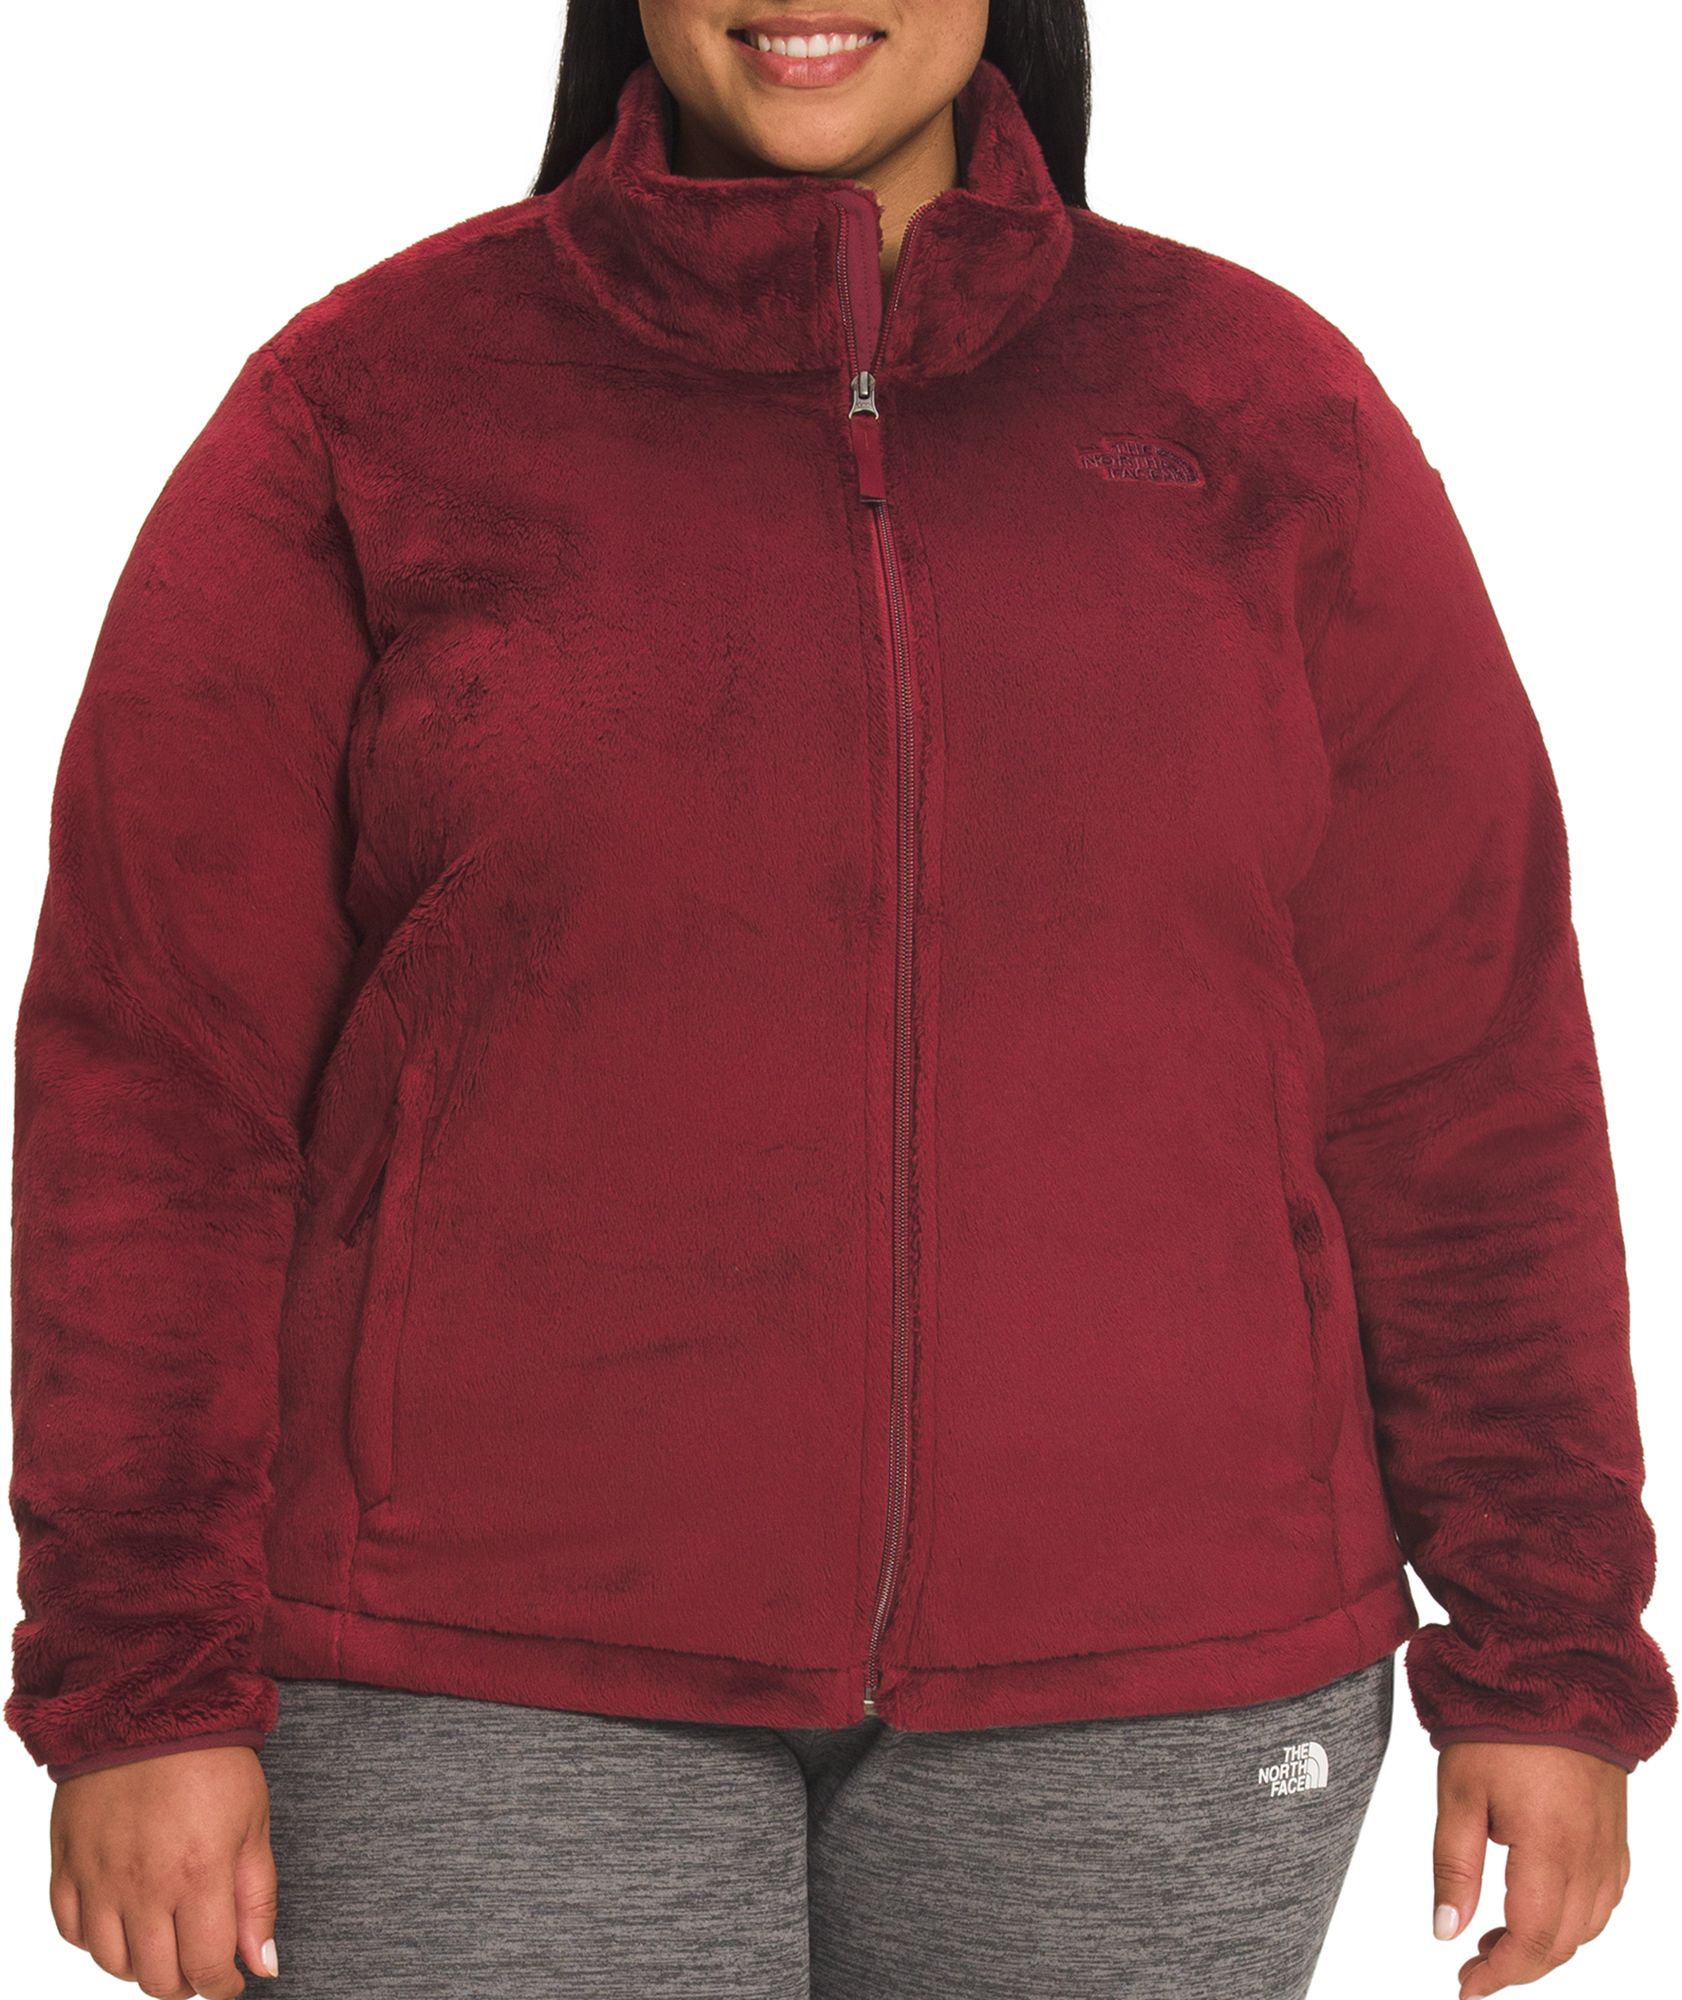 Dick's Sporting Goods The North Face Women's Osito Fleece Jacket